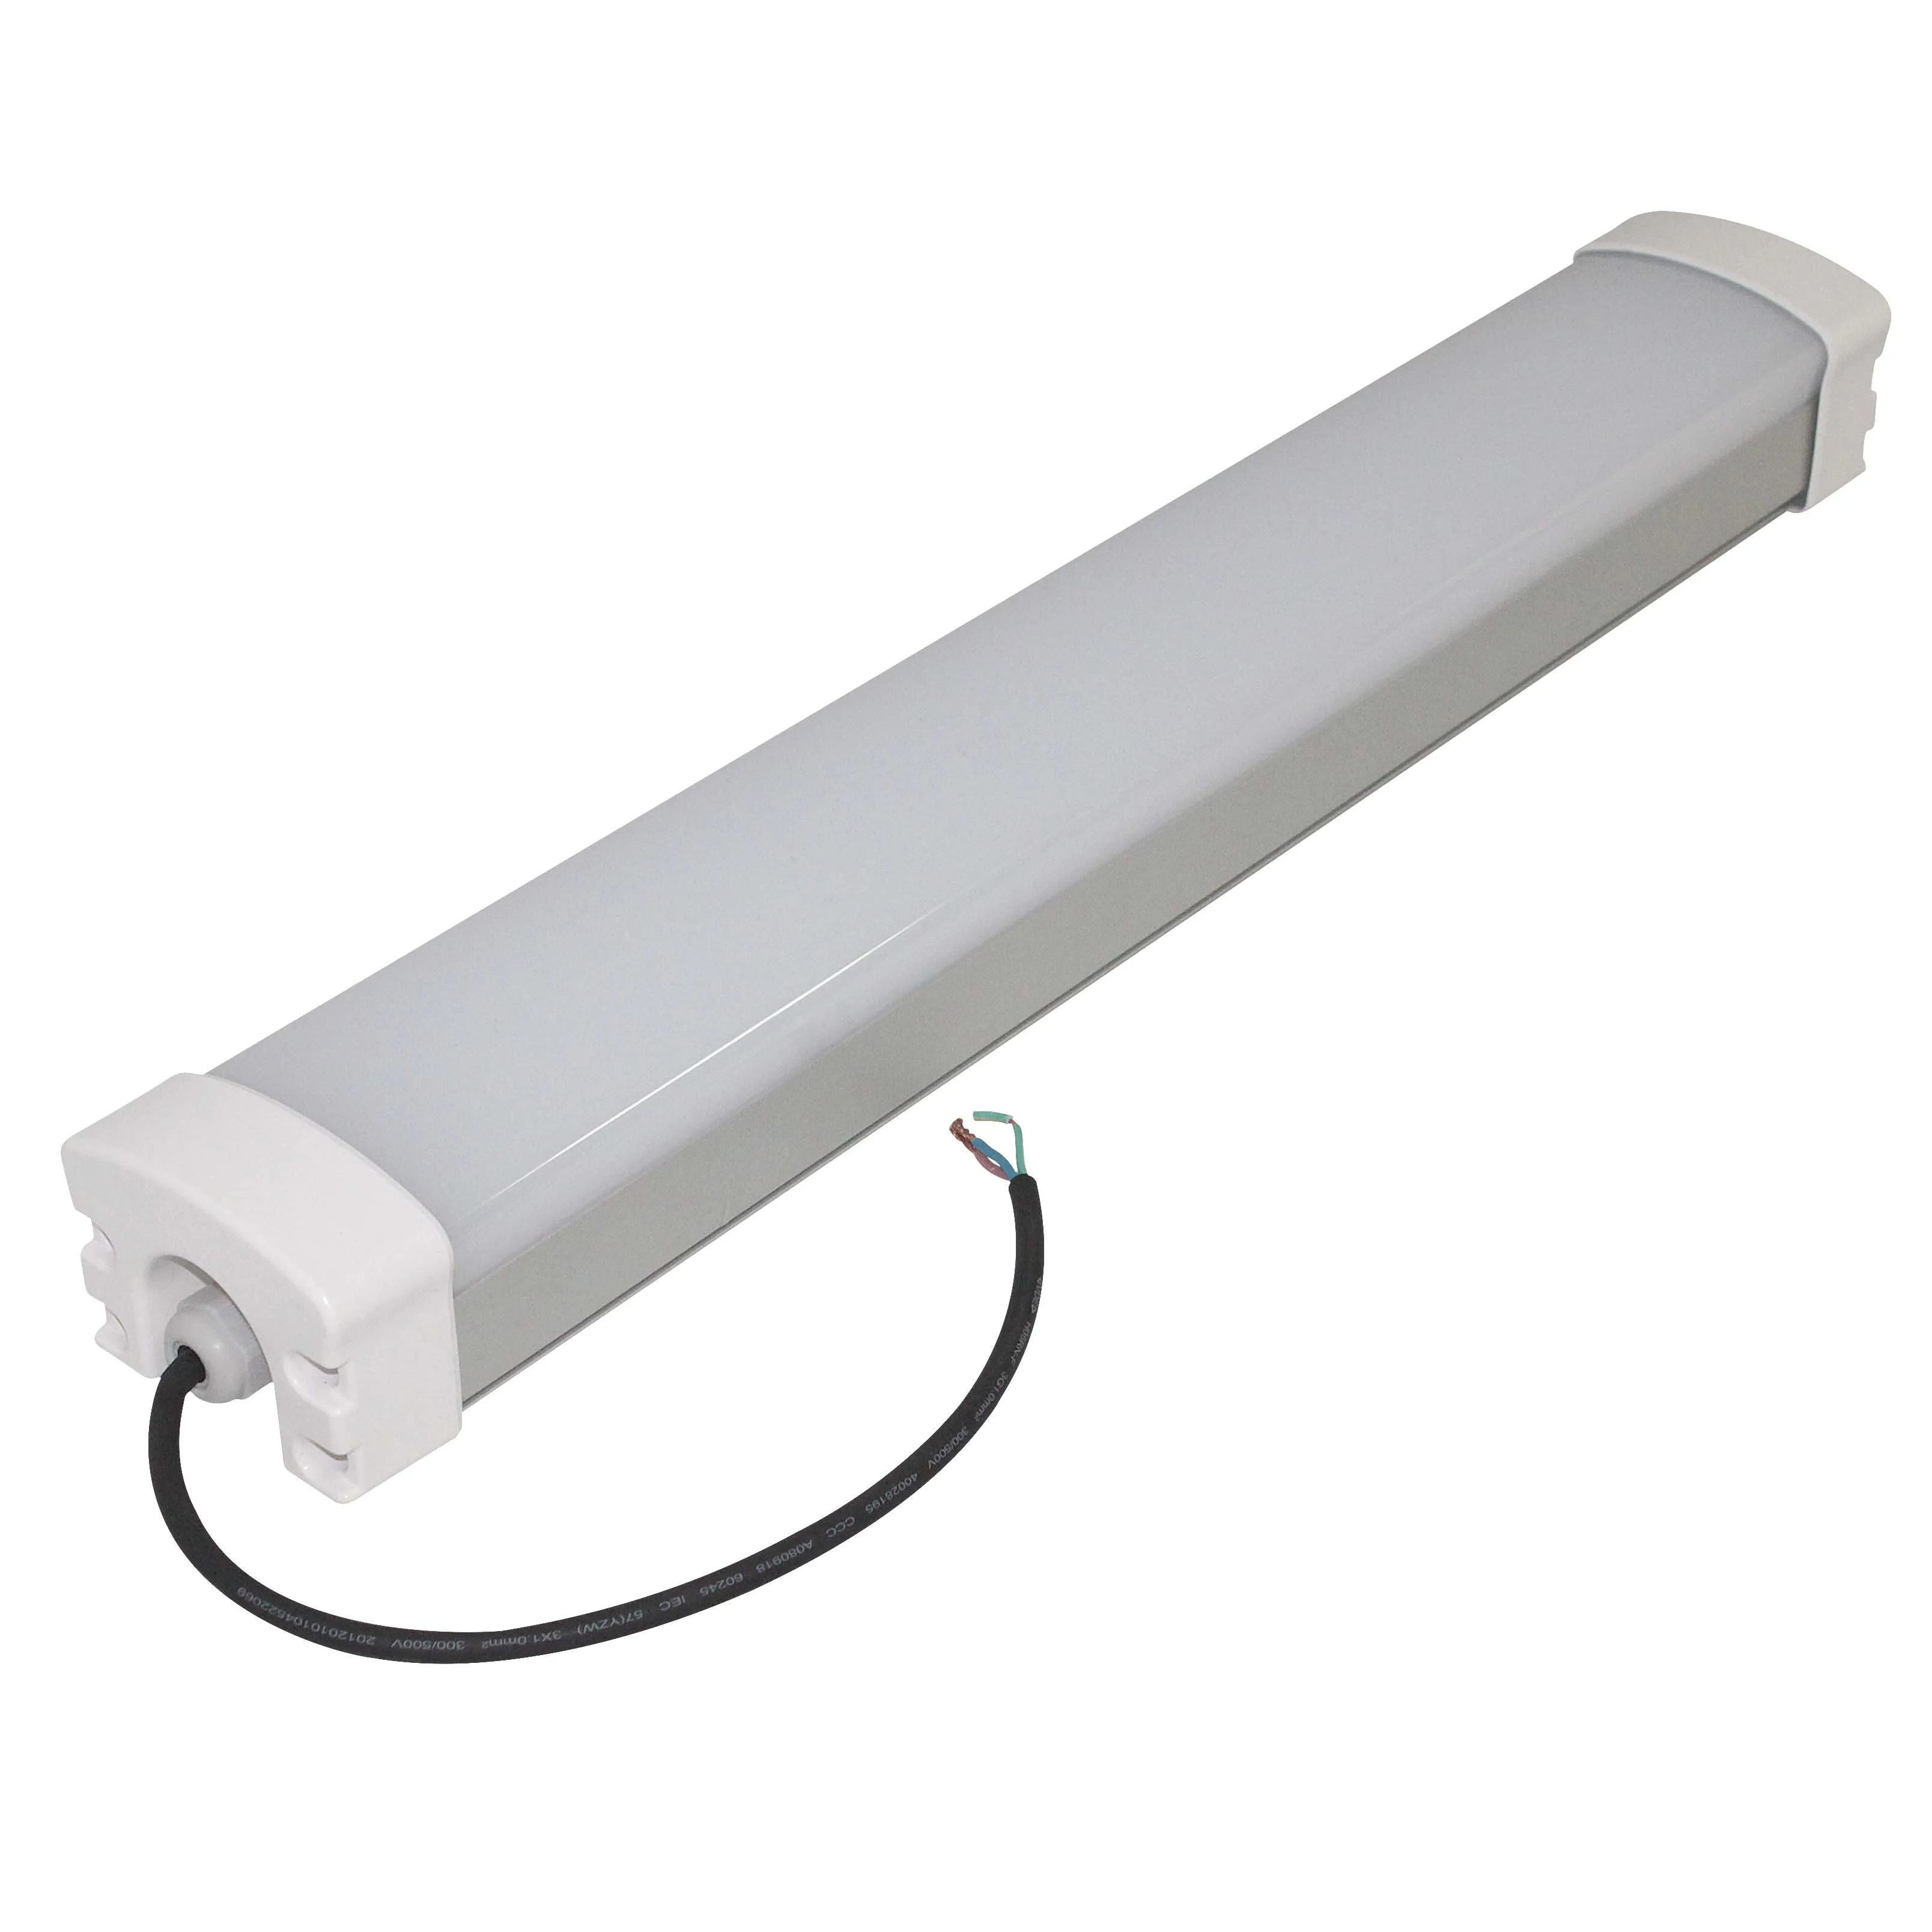 ShineLong Outdoor Industrial Waterproof Lamp Replacement IP65 Emergency  Led Tri-Proof Tube Light